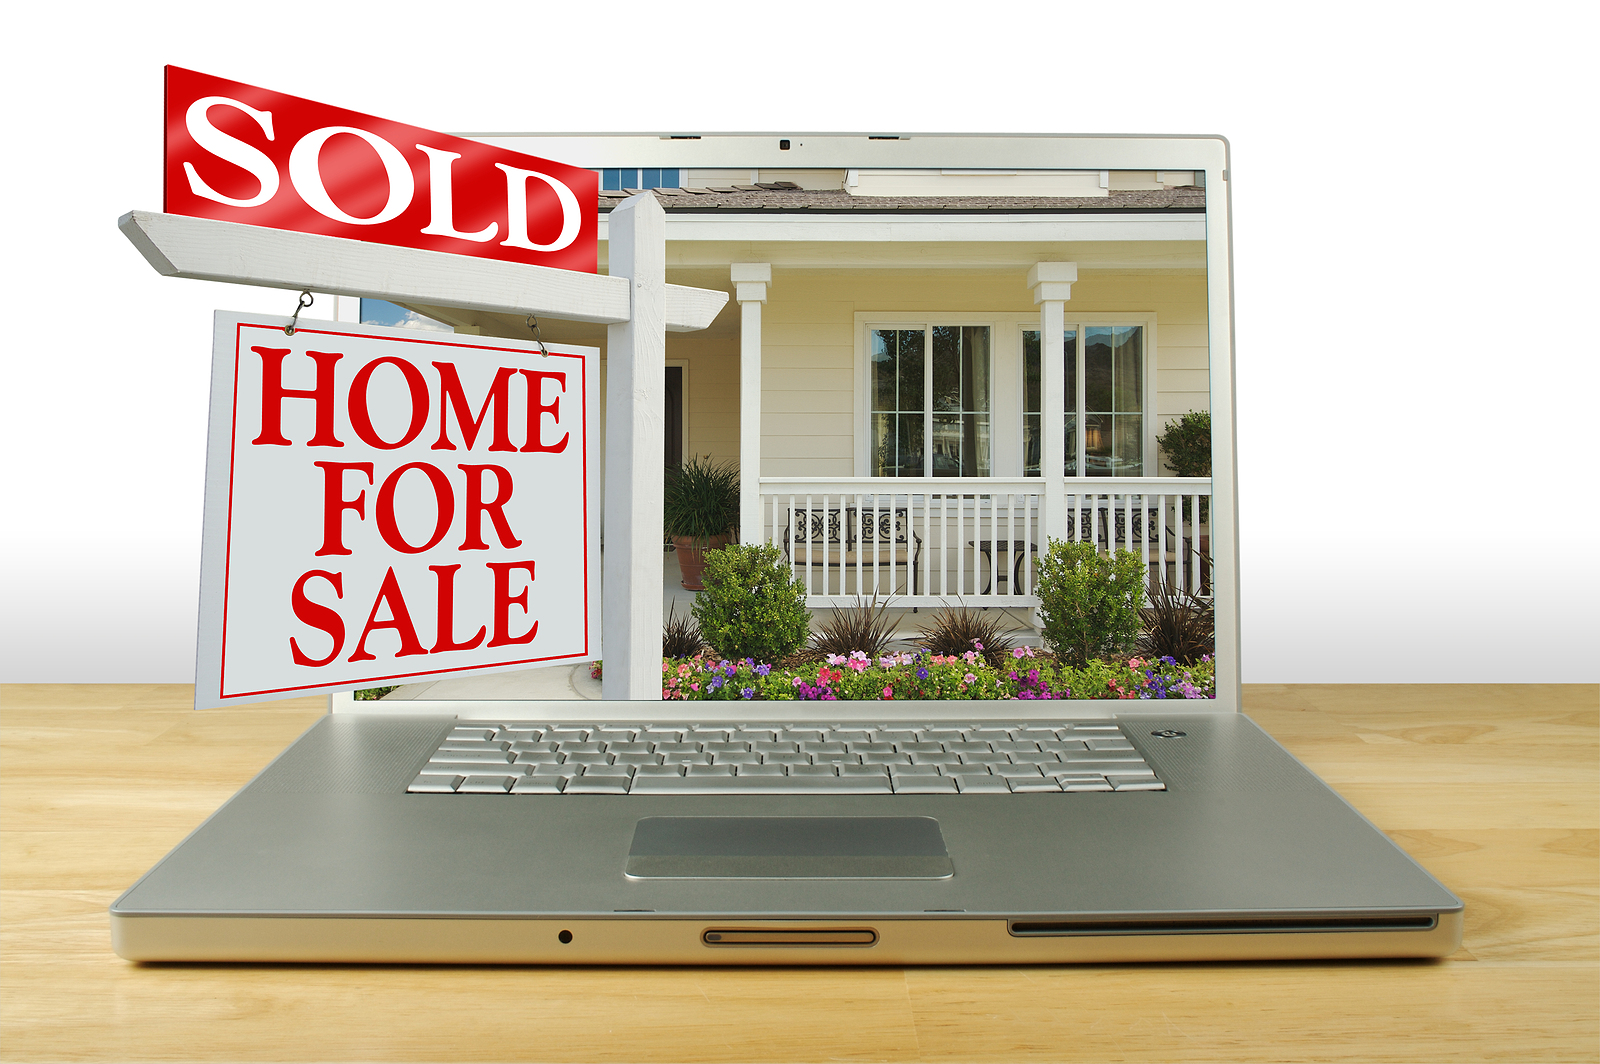 Sold Home for Sale Sign, New Home on Laptop. See my theme variations.